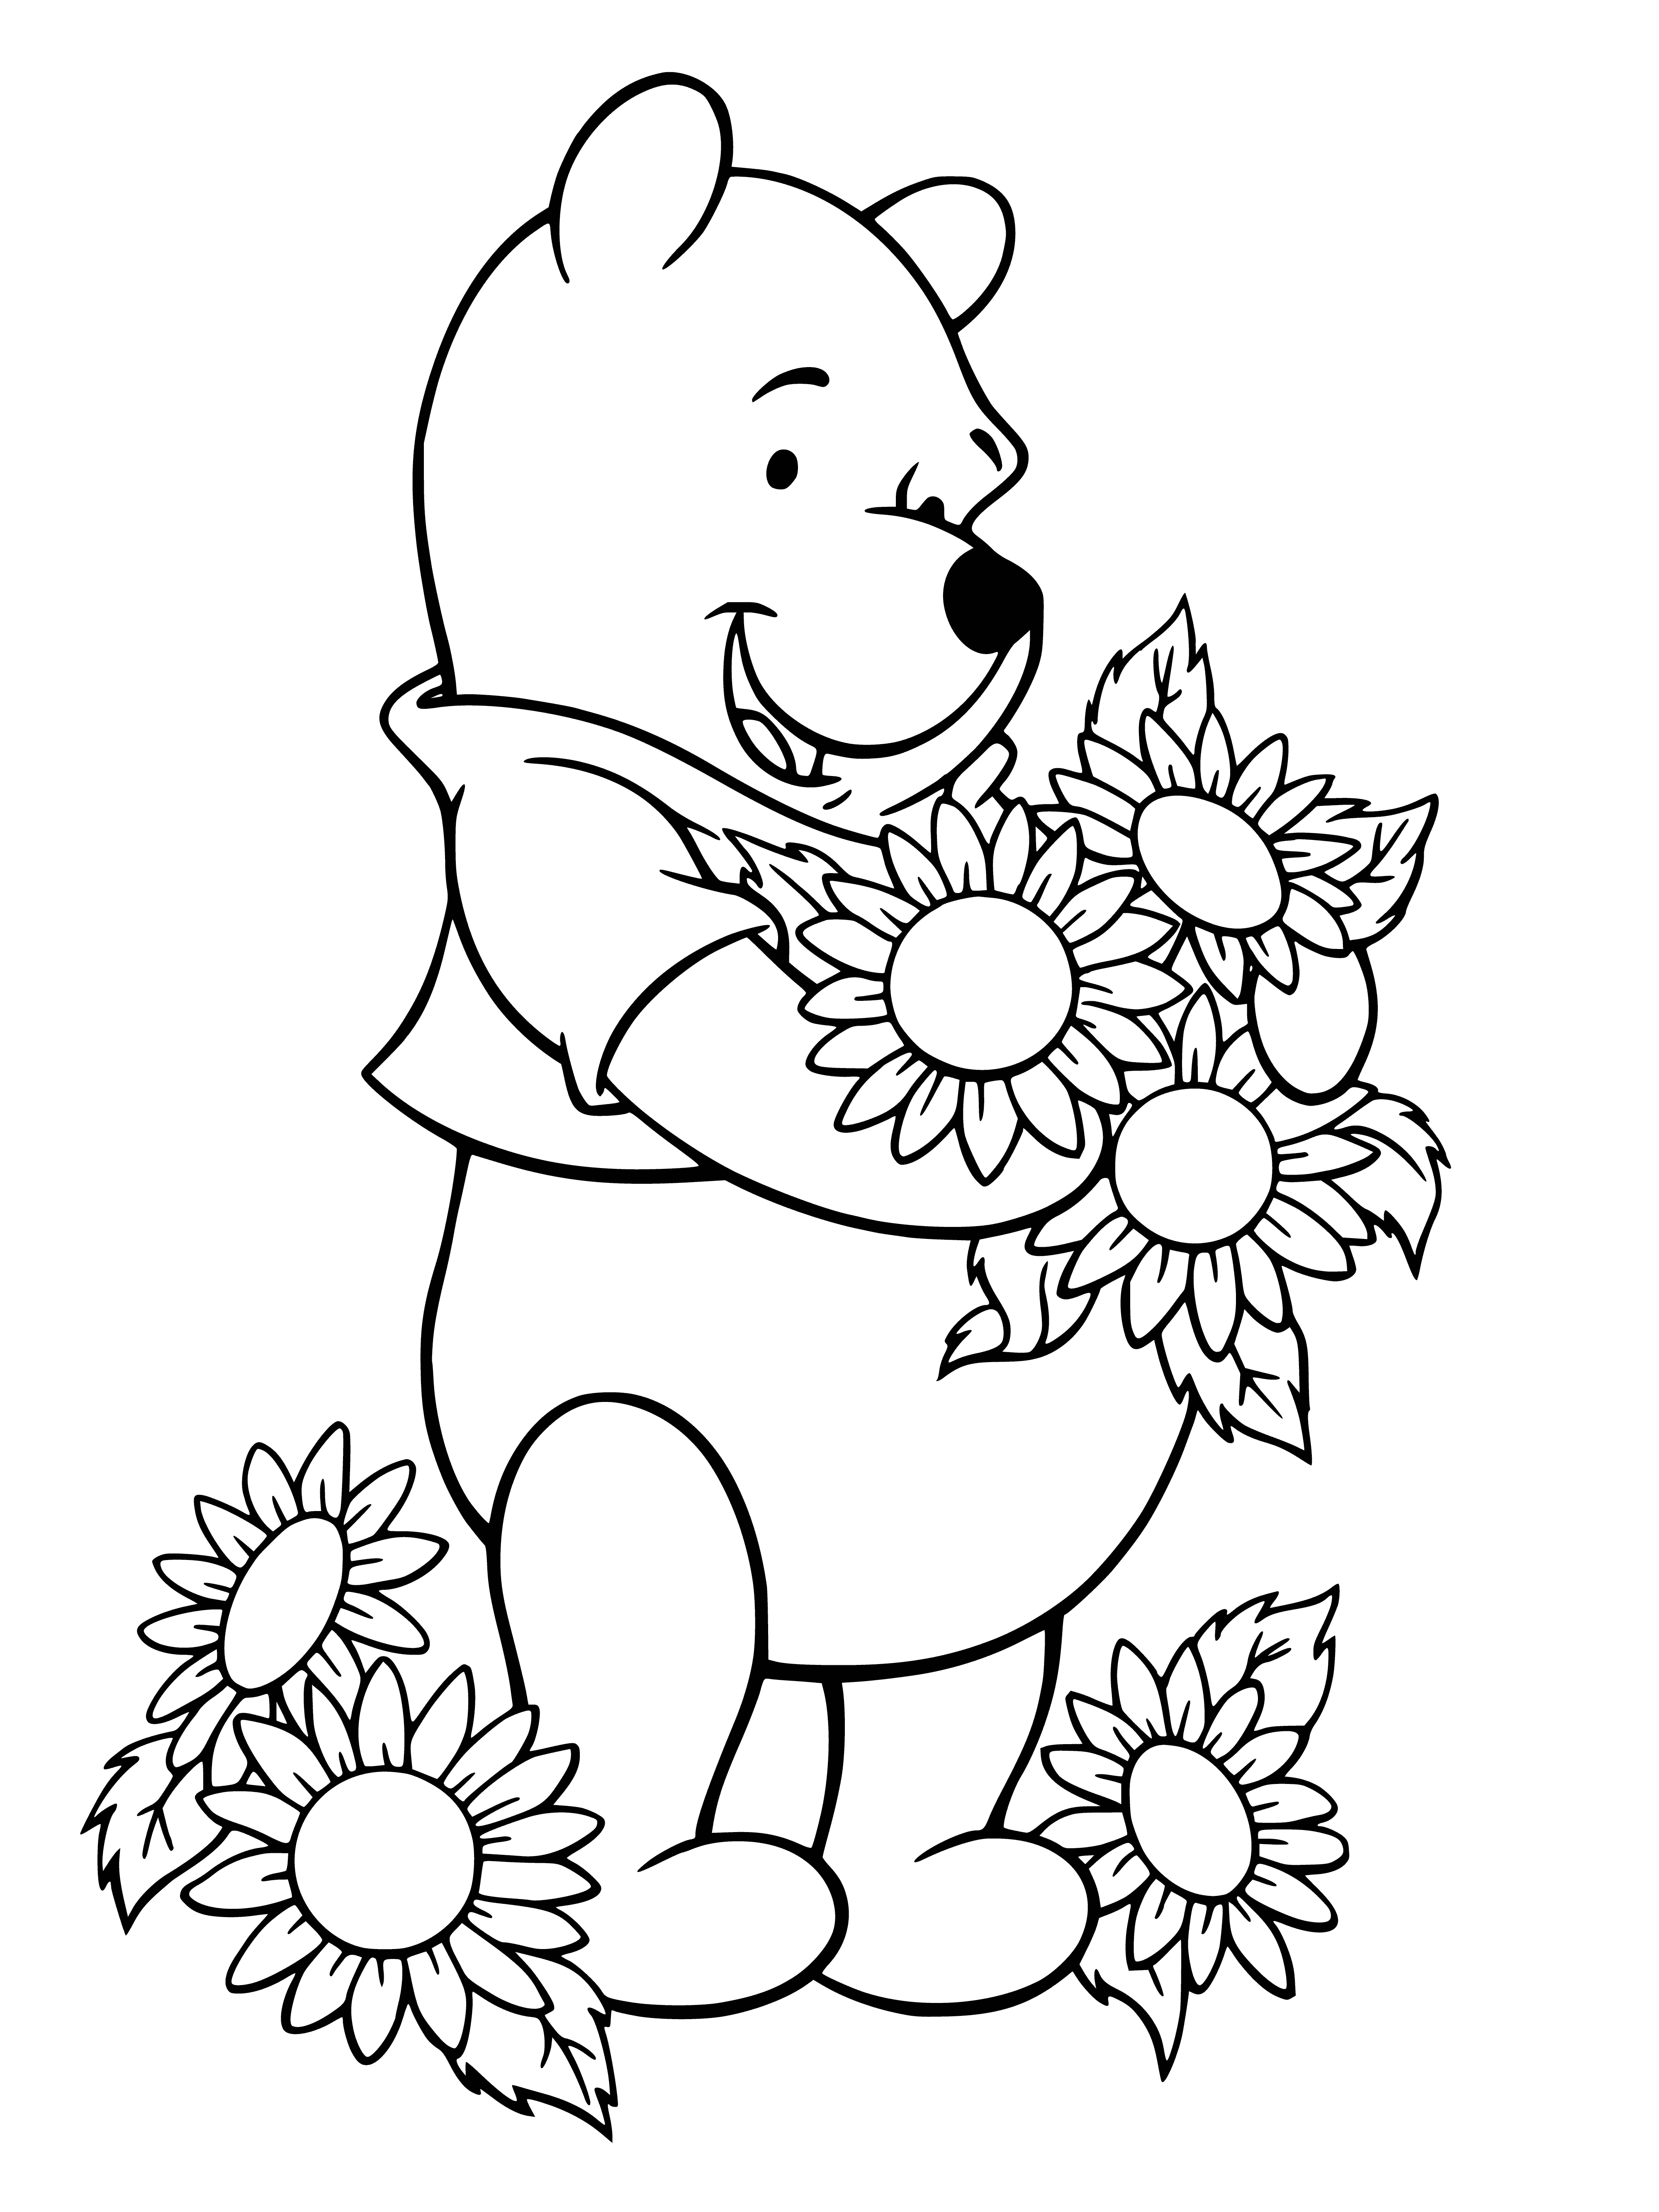 Winnie and the sunflowers coloring page